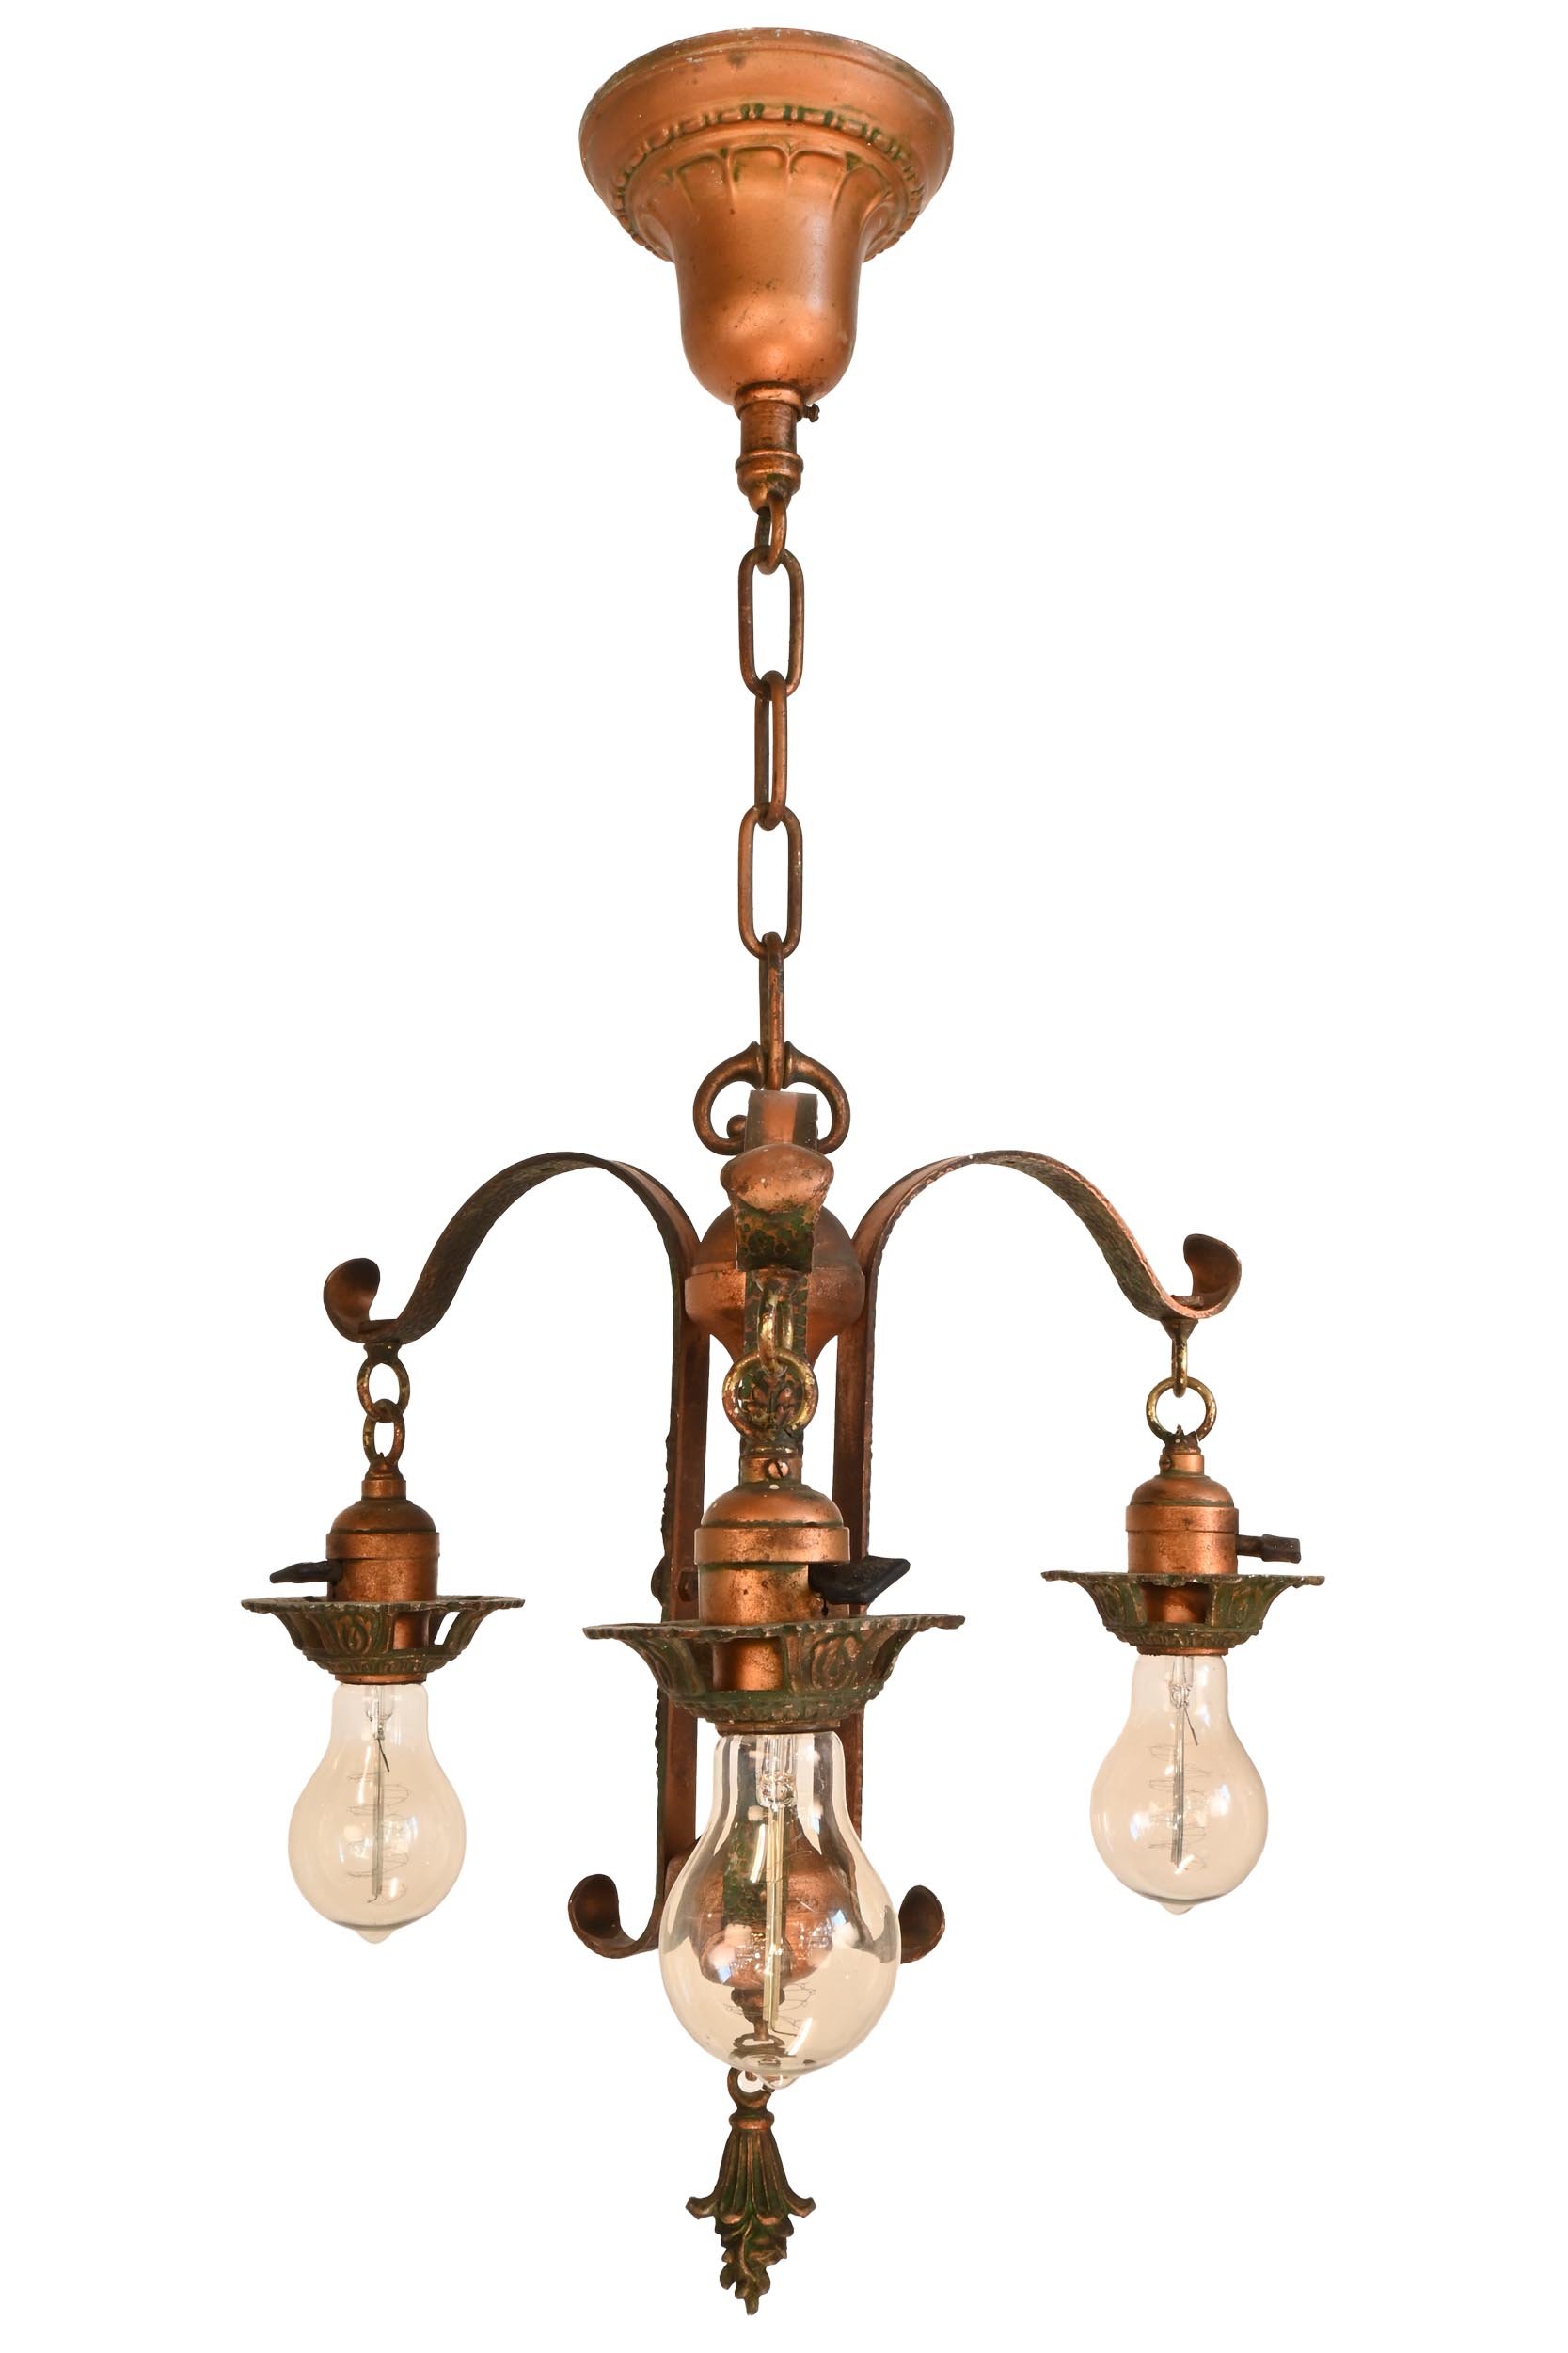 bare bulb 3 light original polychrome hand worked iron chandeliers